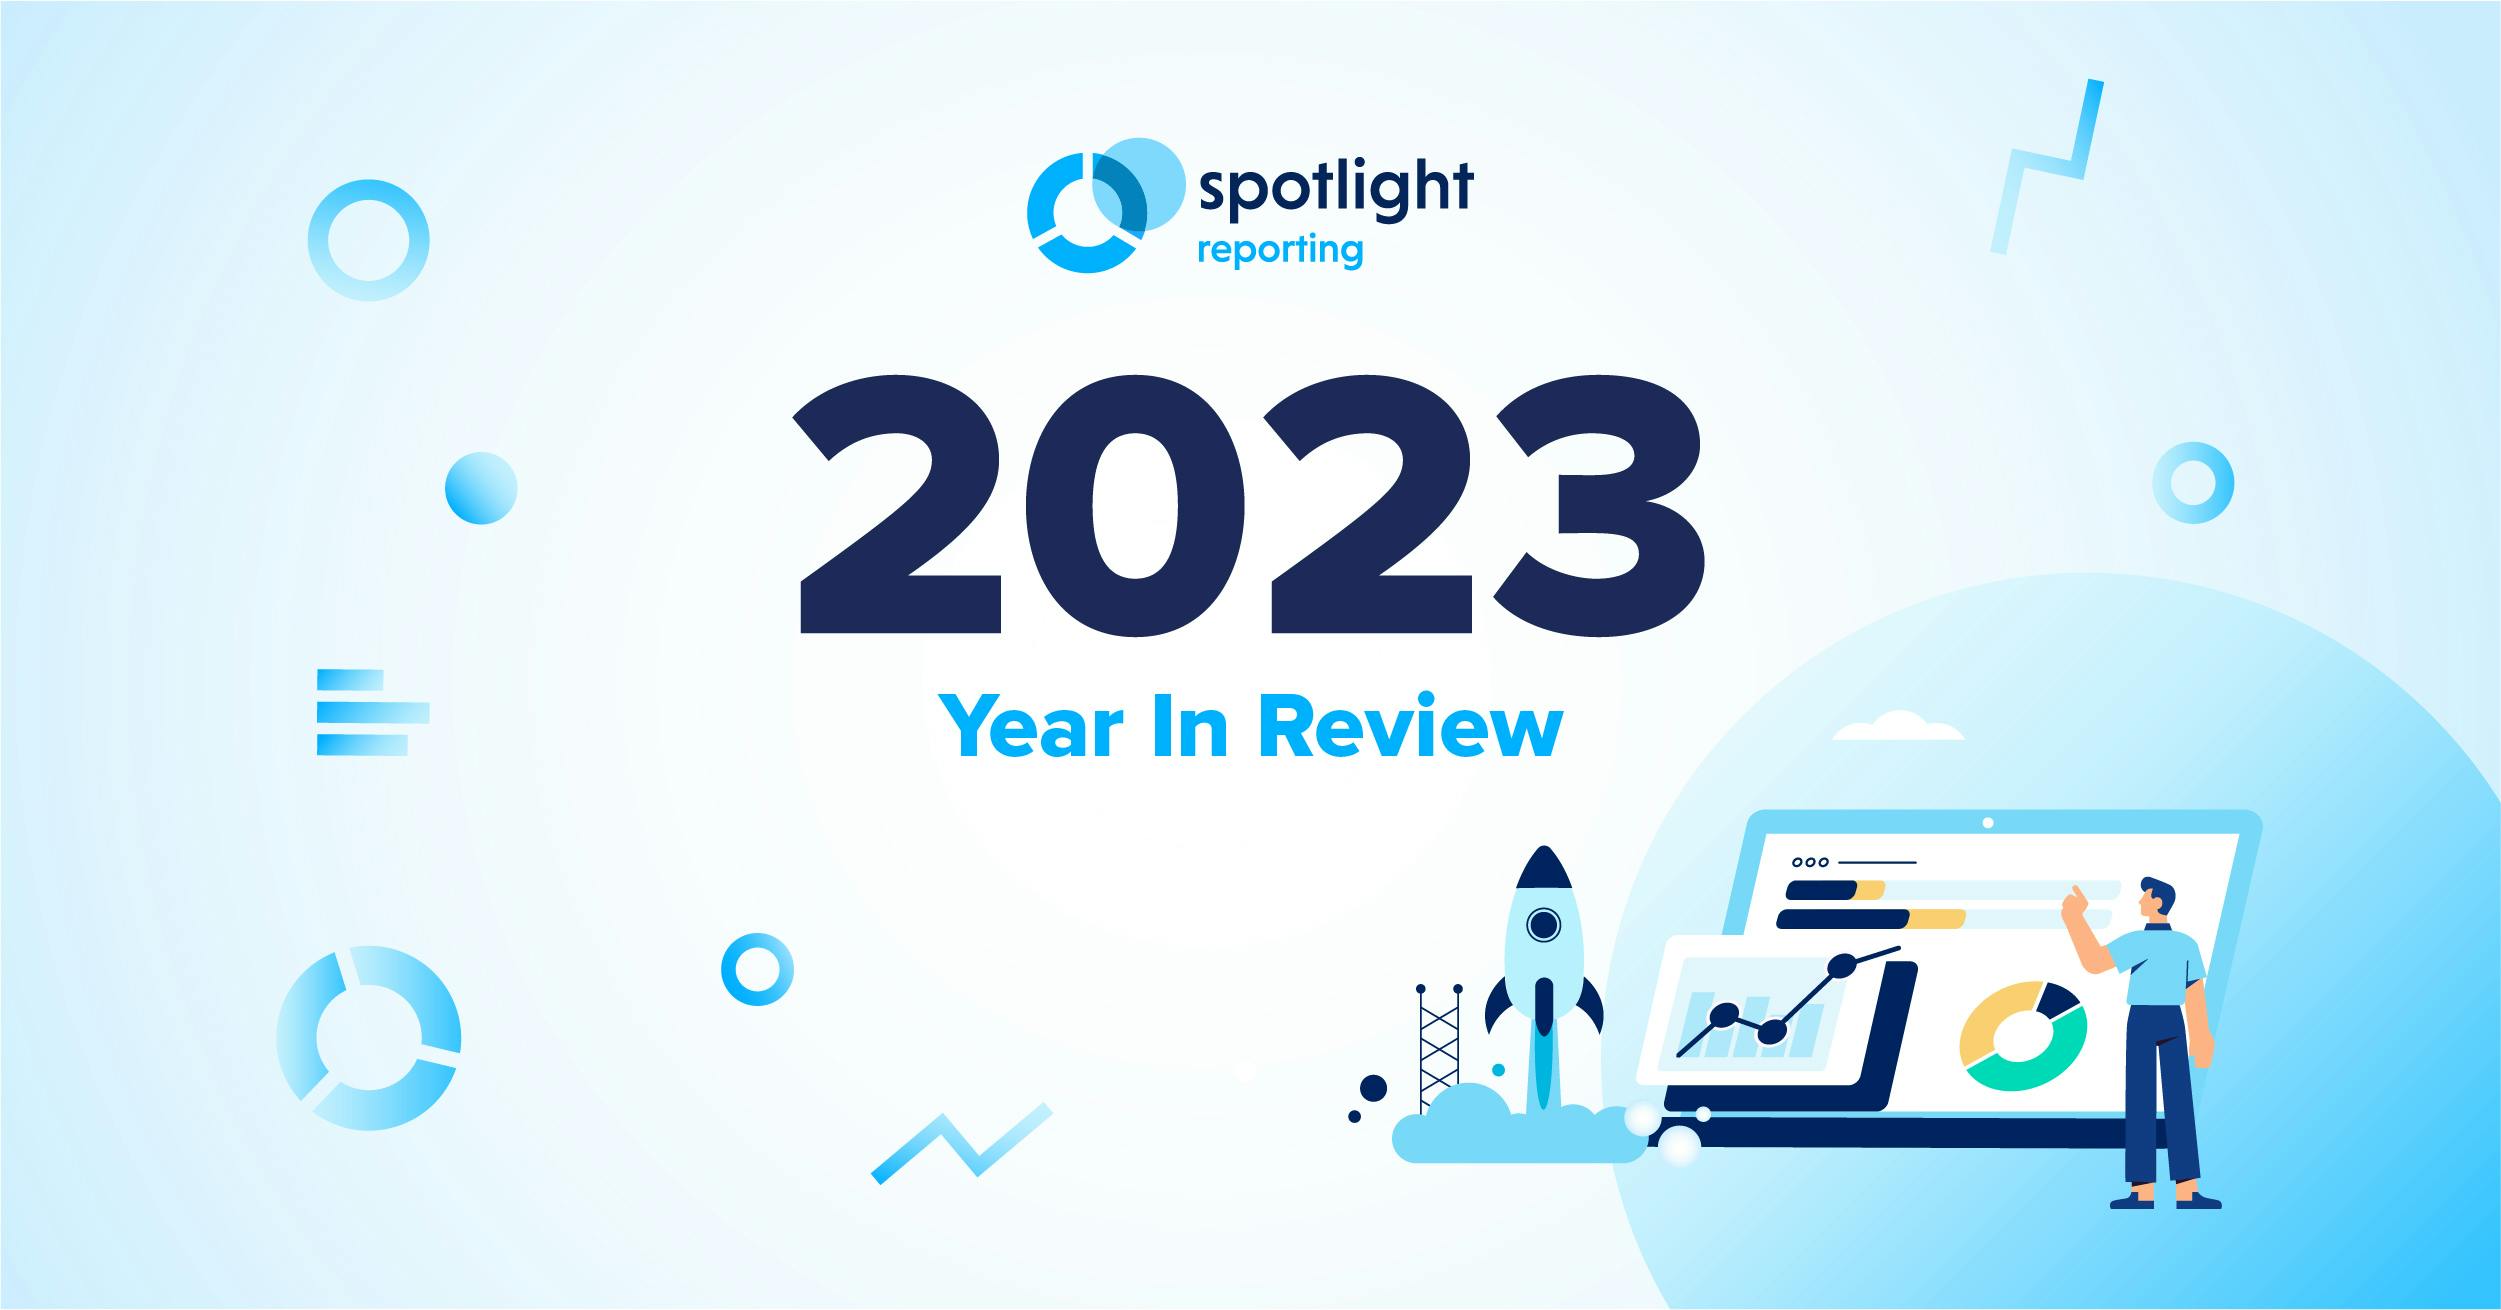 Spotlight Reporting in 2023: A Year of Innovation image